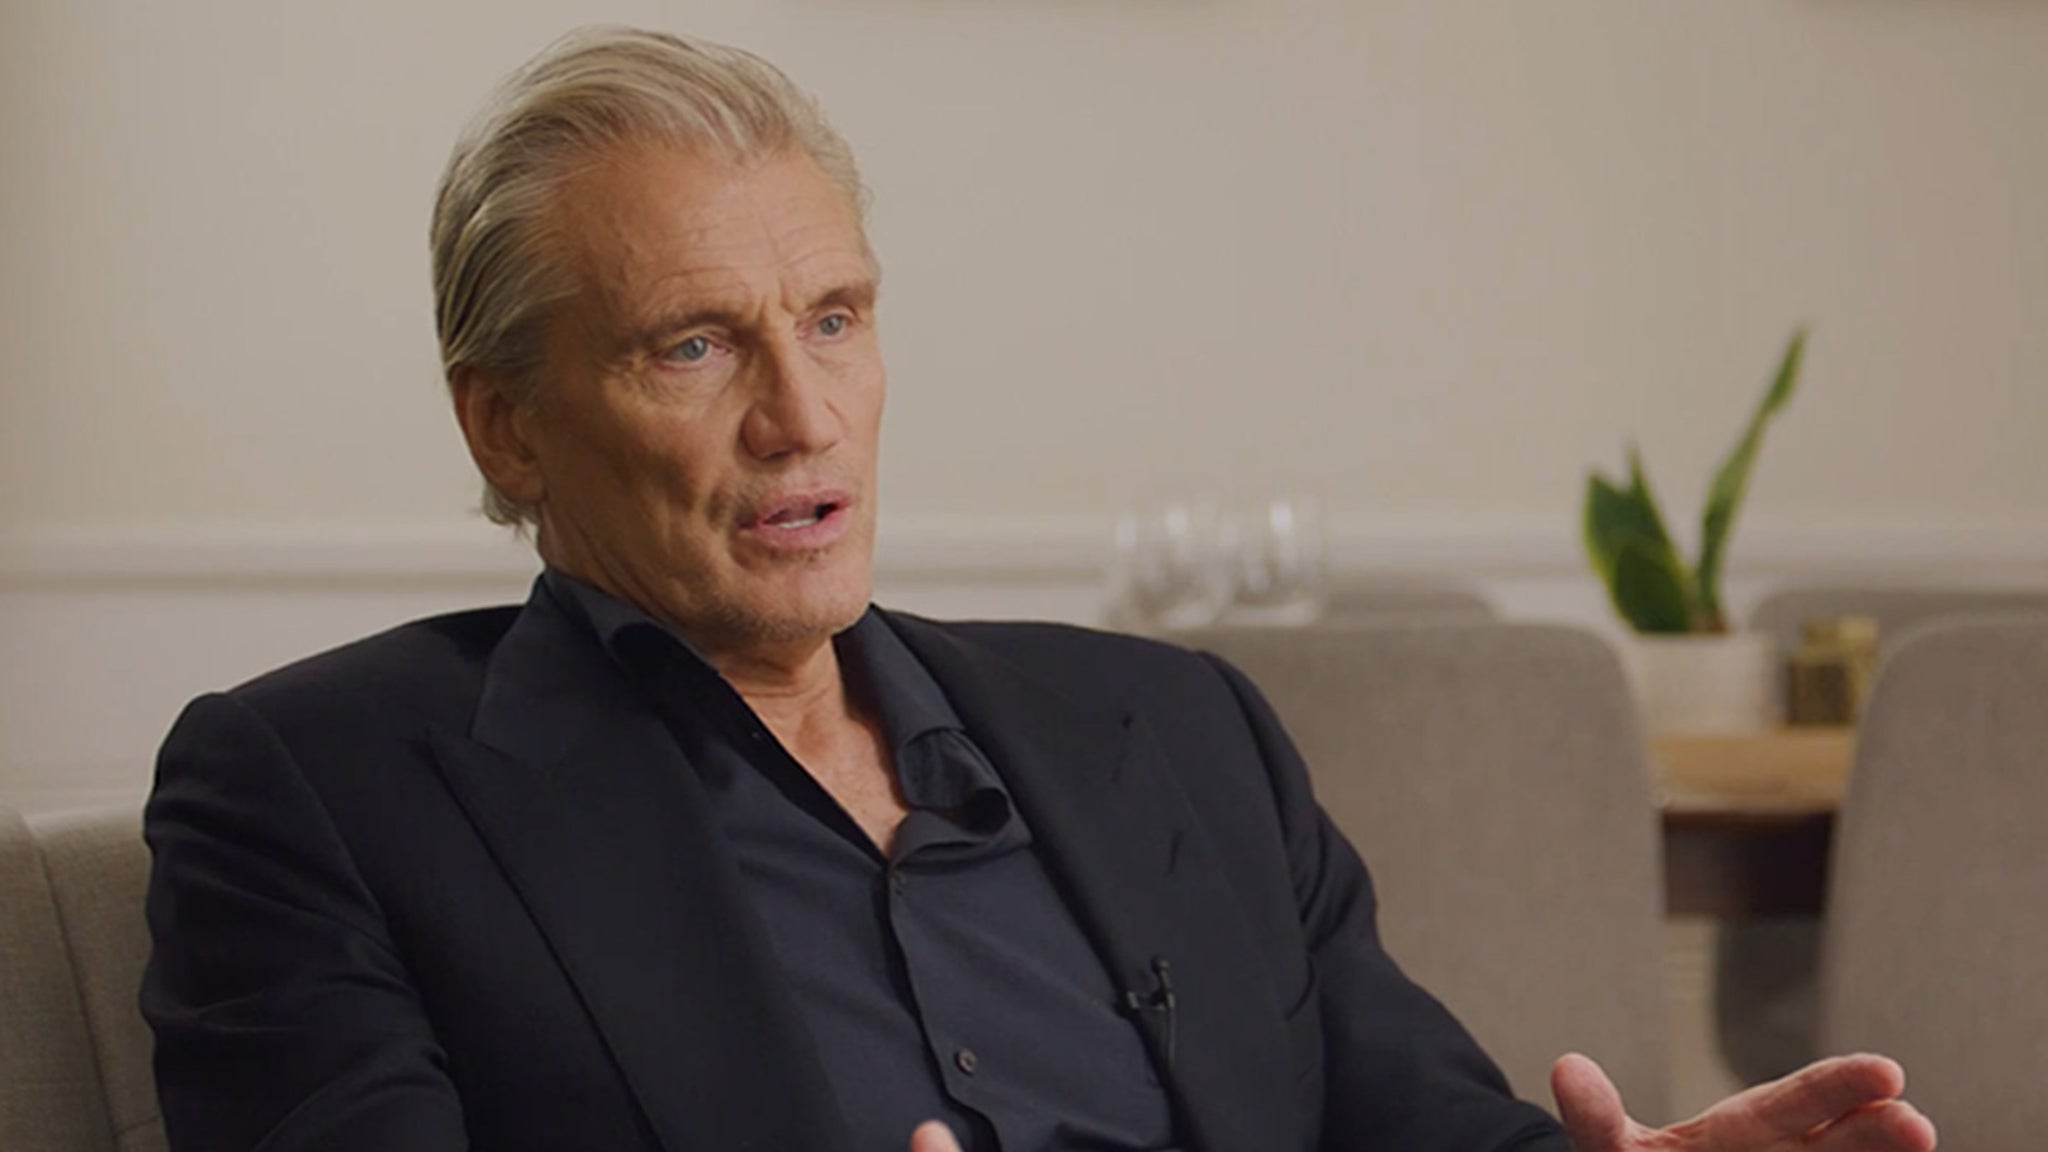 Dolph Lundgren Reveals He’s Been Battling Cancer For 8 Years